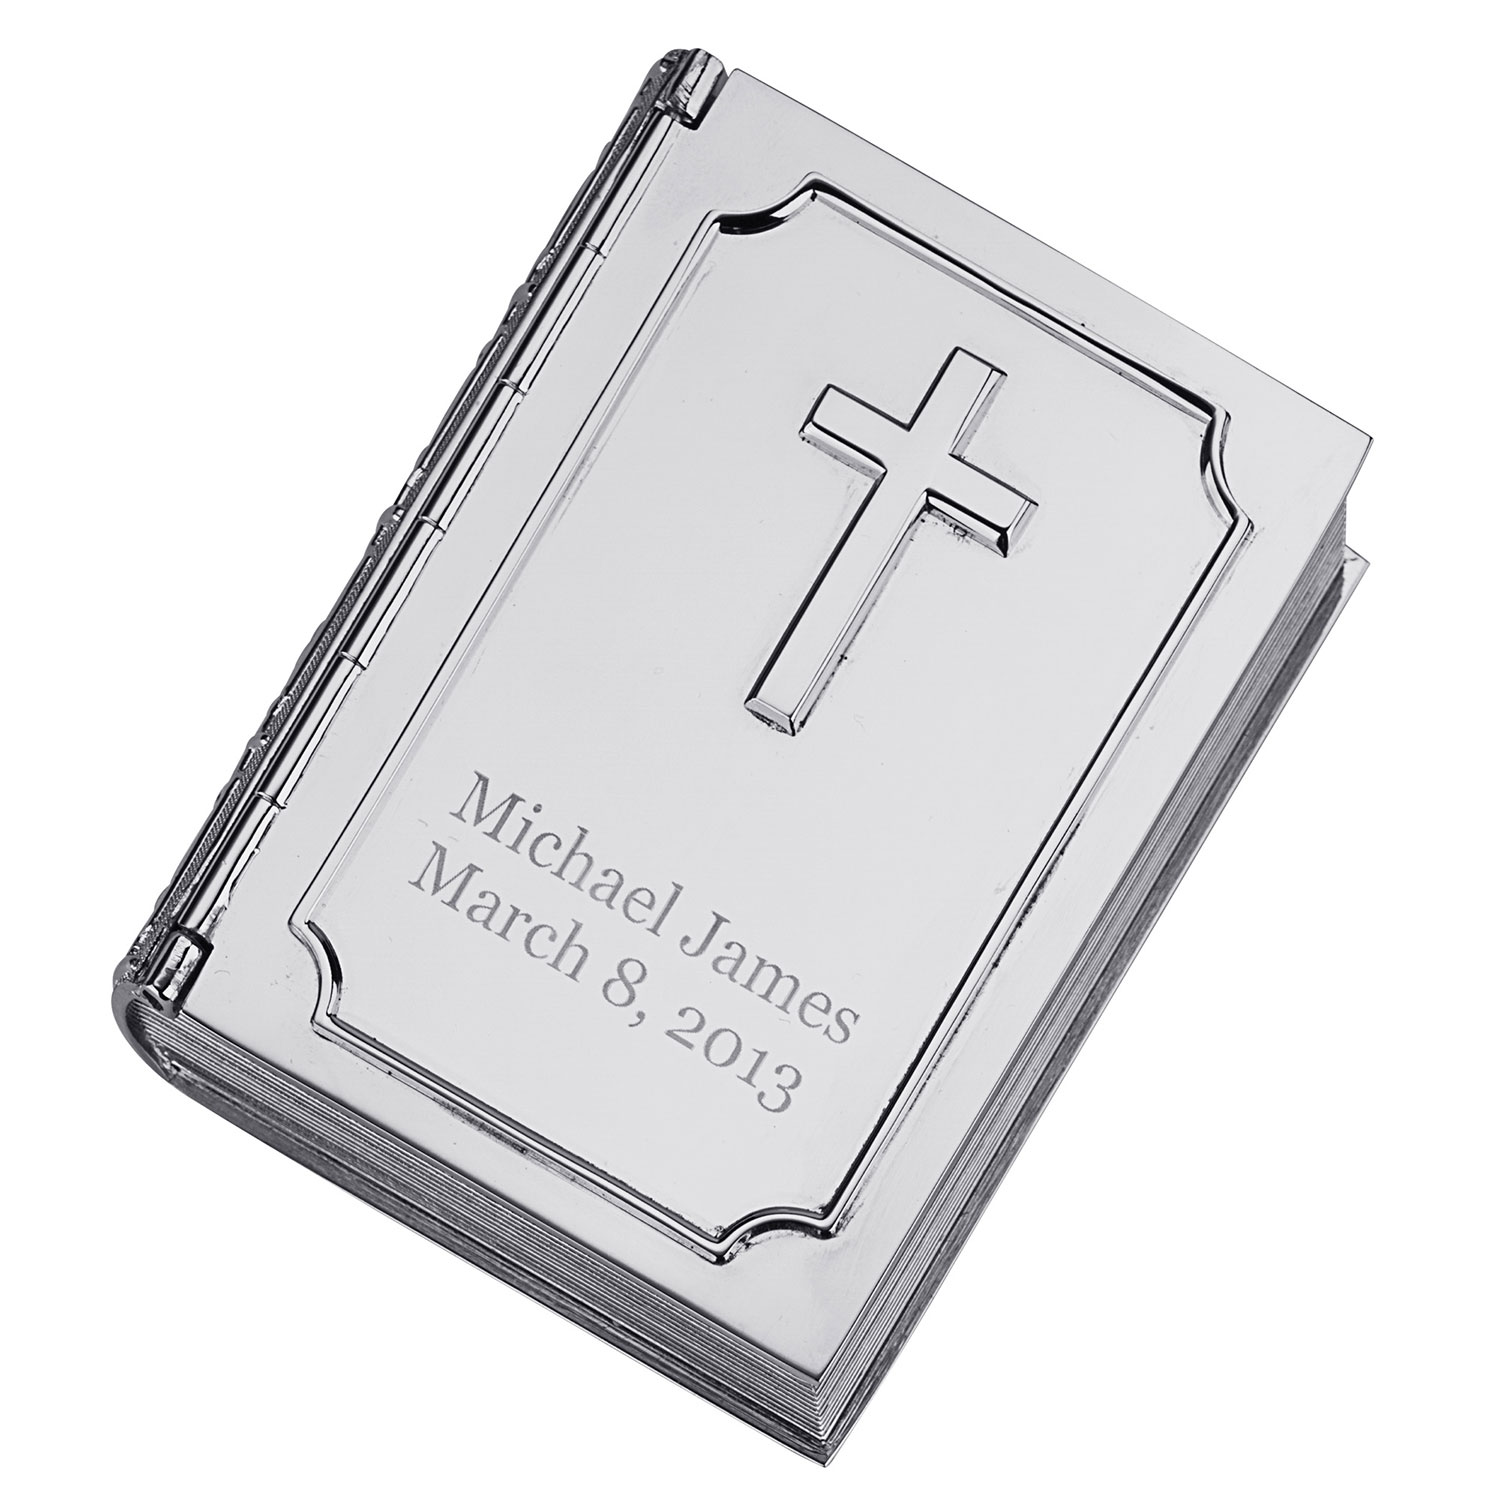 Engraved Hinged Book Box with Cross